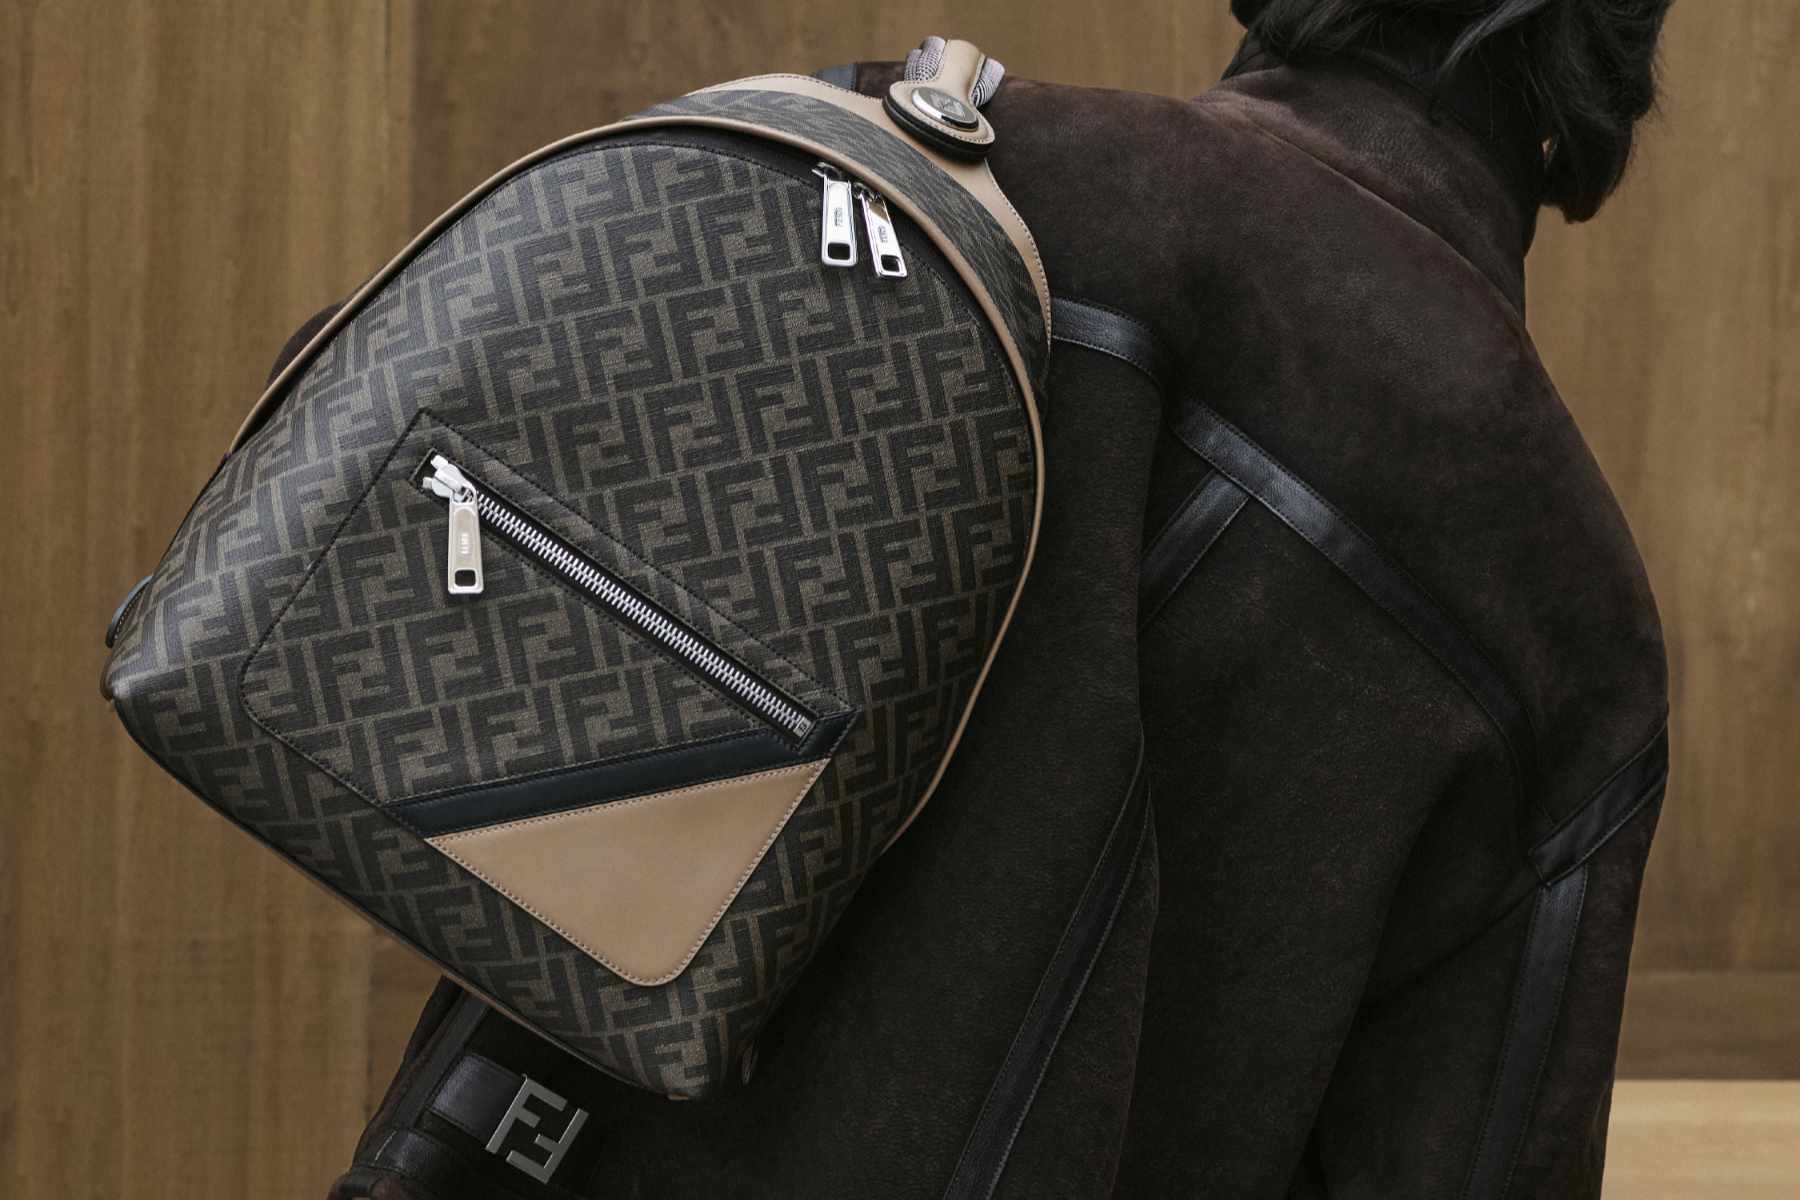 Fendi's Chiodo backpack in brown monogrammed leather